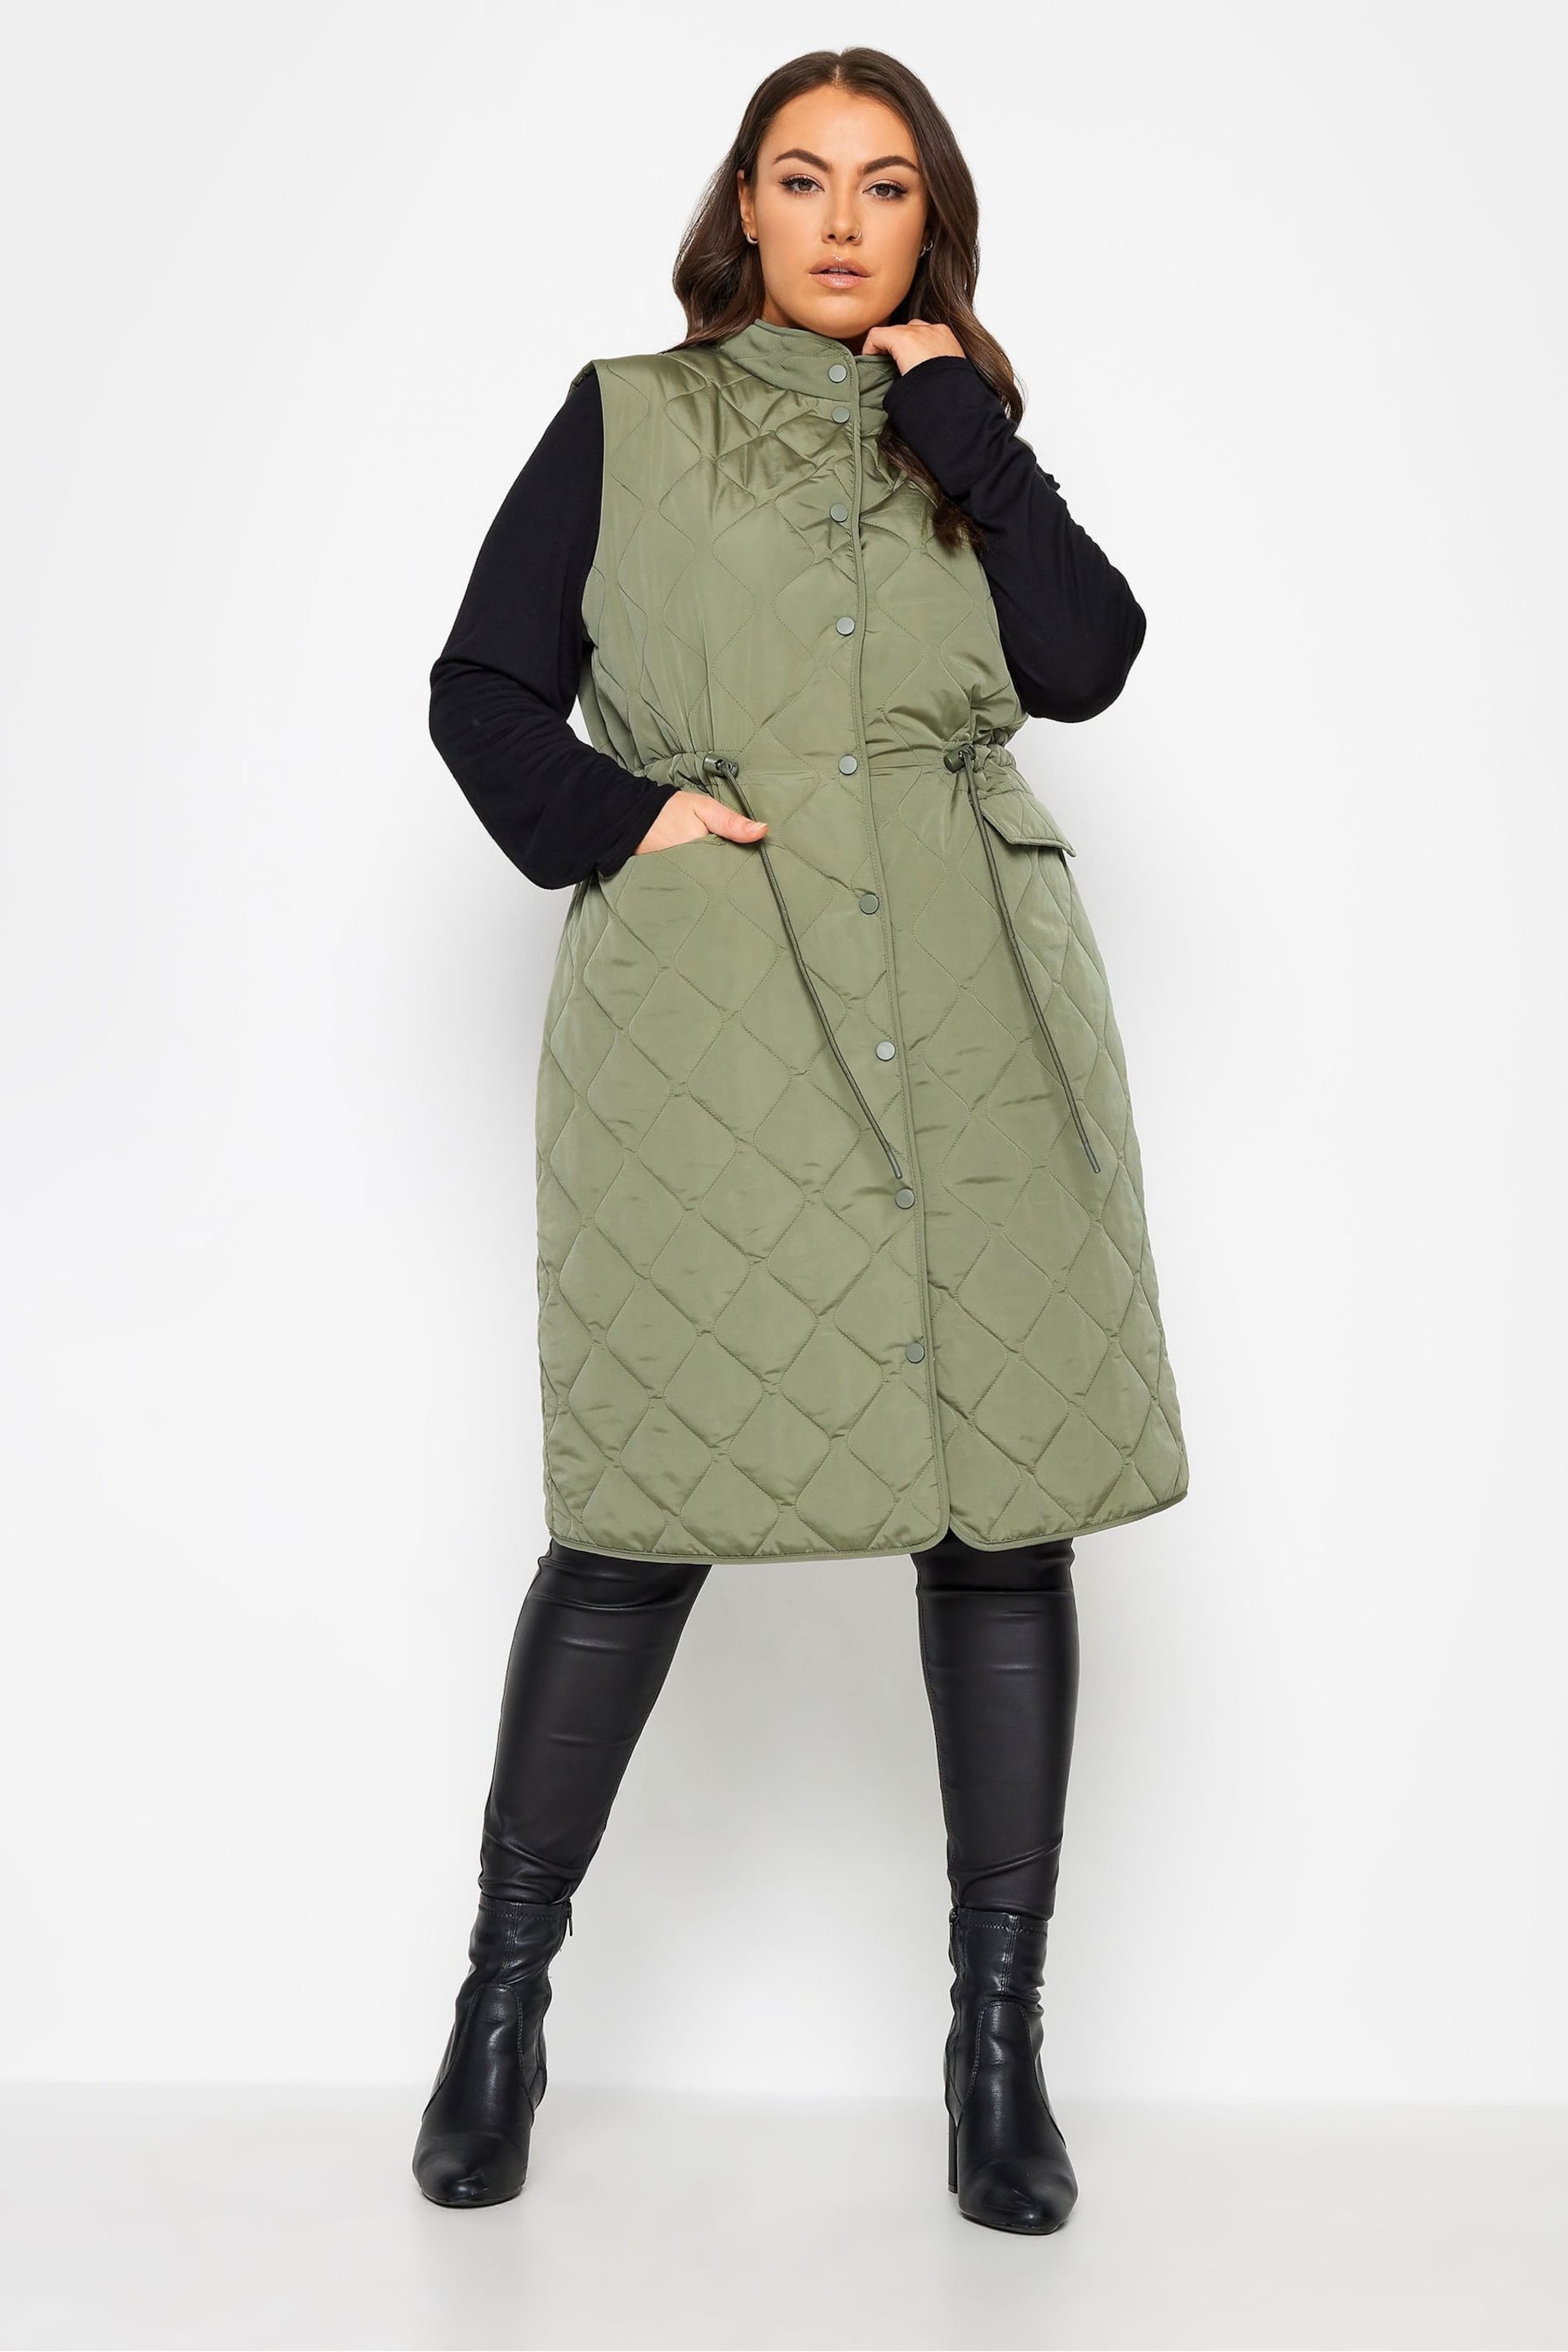 Yours Curve Green Midi Lightweight Gilet - Image 2 of 4